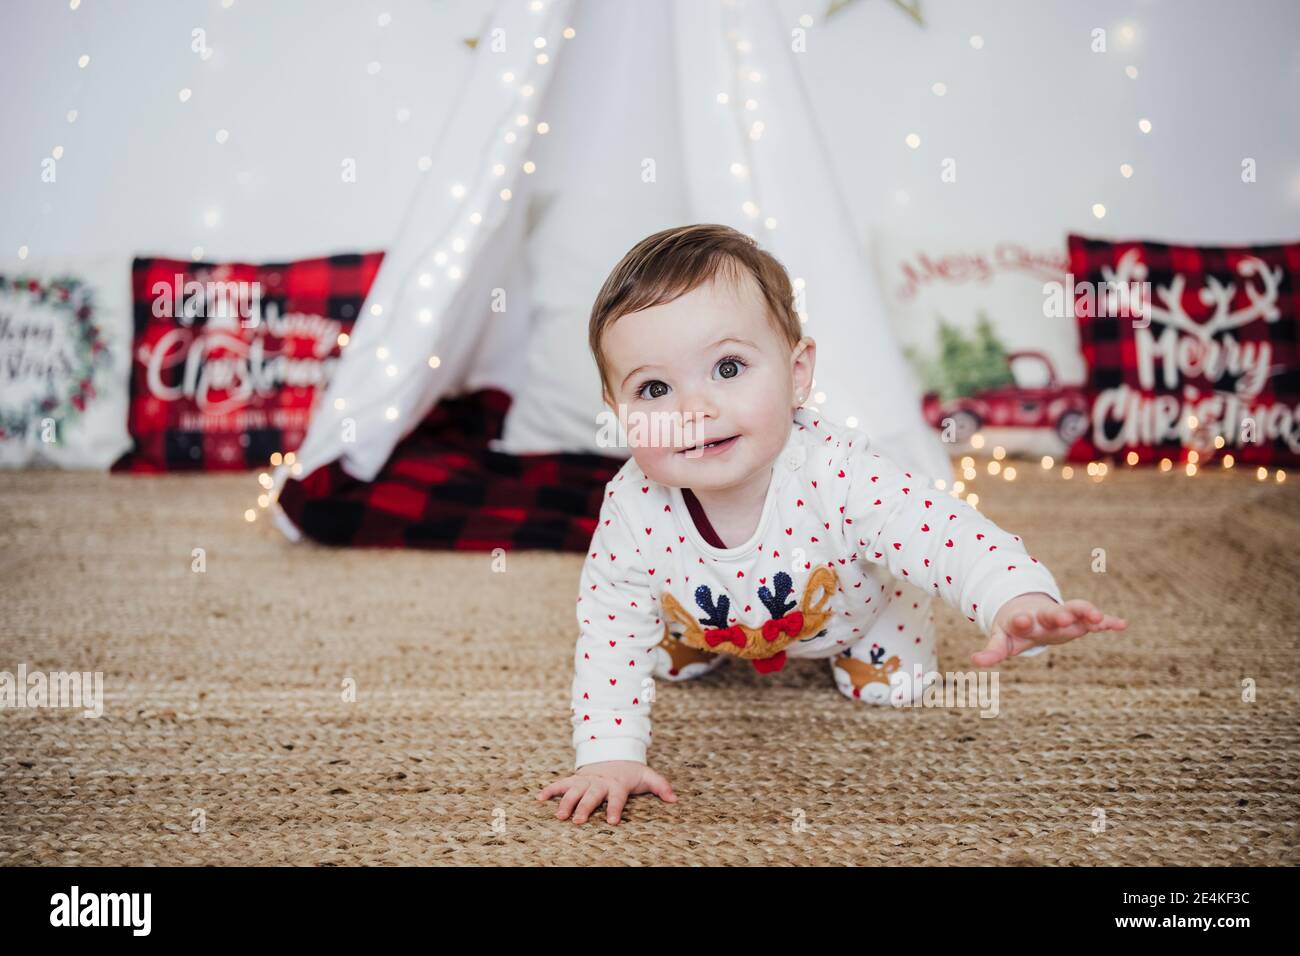 Cute baby girl smiling while crawling at home during Christmas Stock Photo